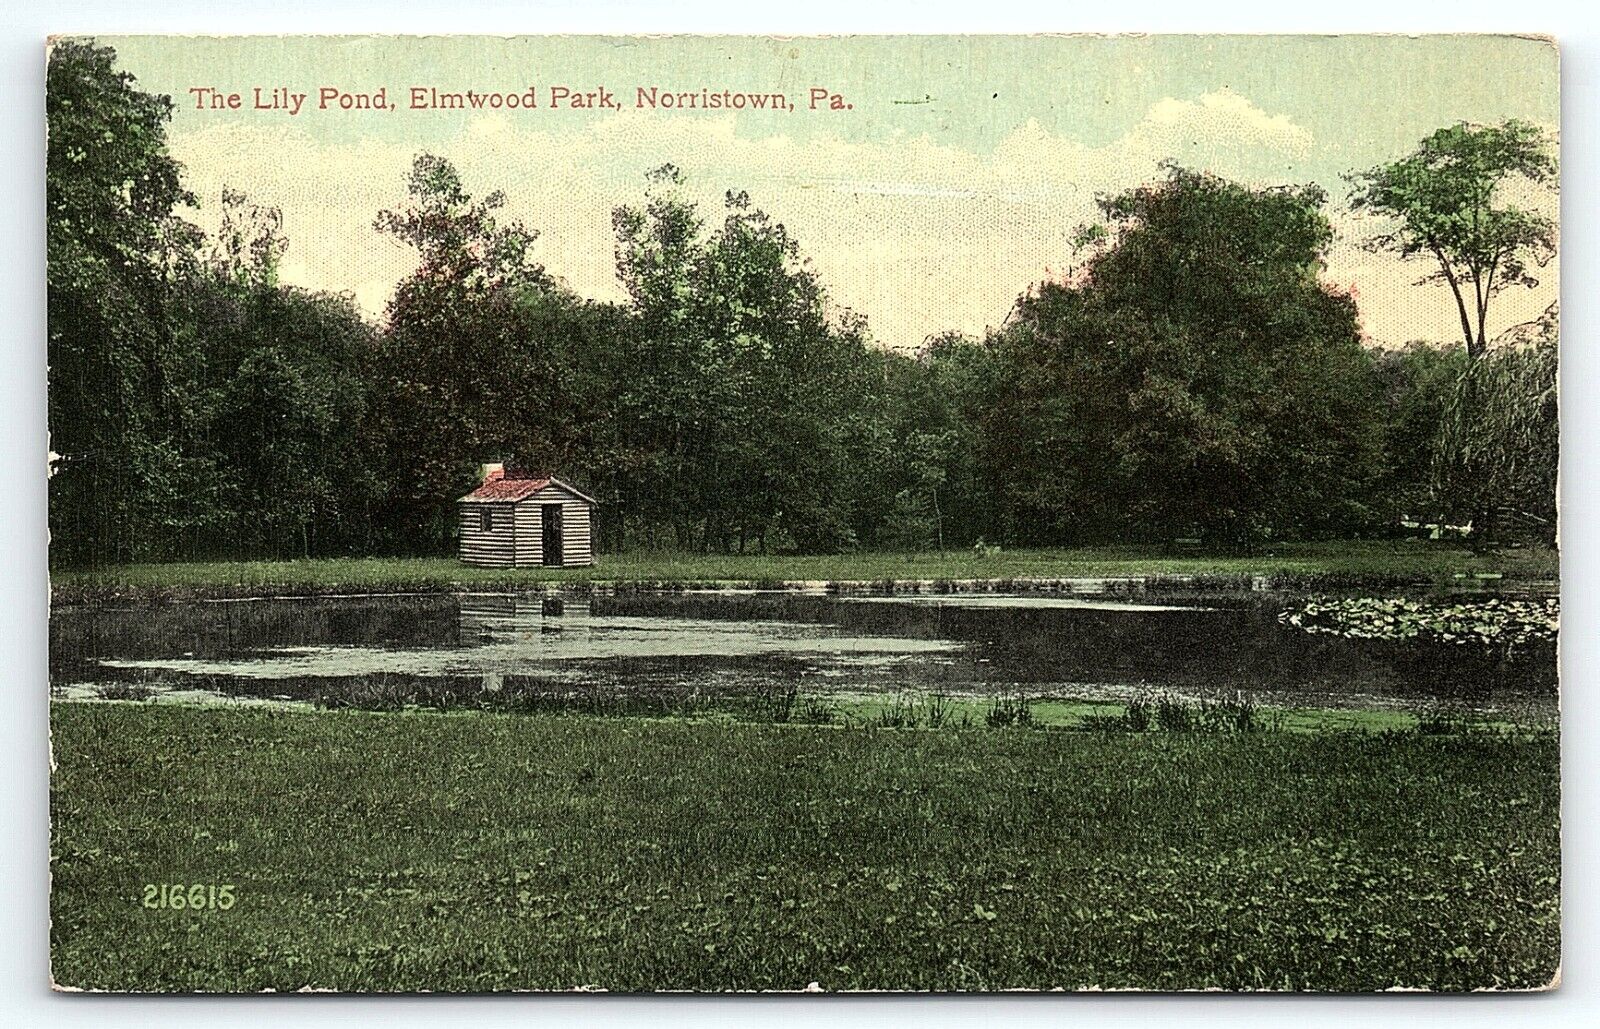 c1910 NORRISTOWN PA ELMWOOD PARK THE LILY POND SCENIC EARLY POSTCARD P4069